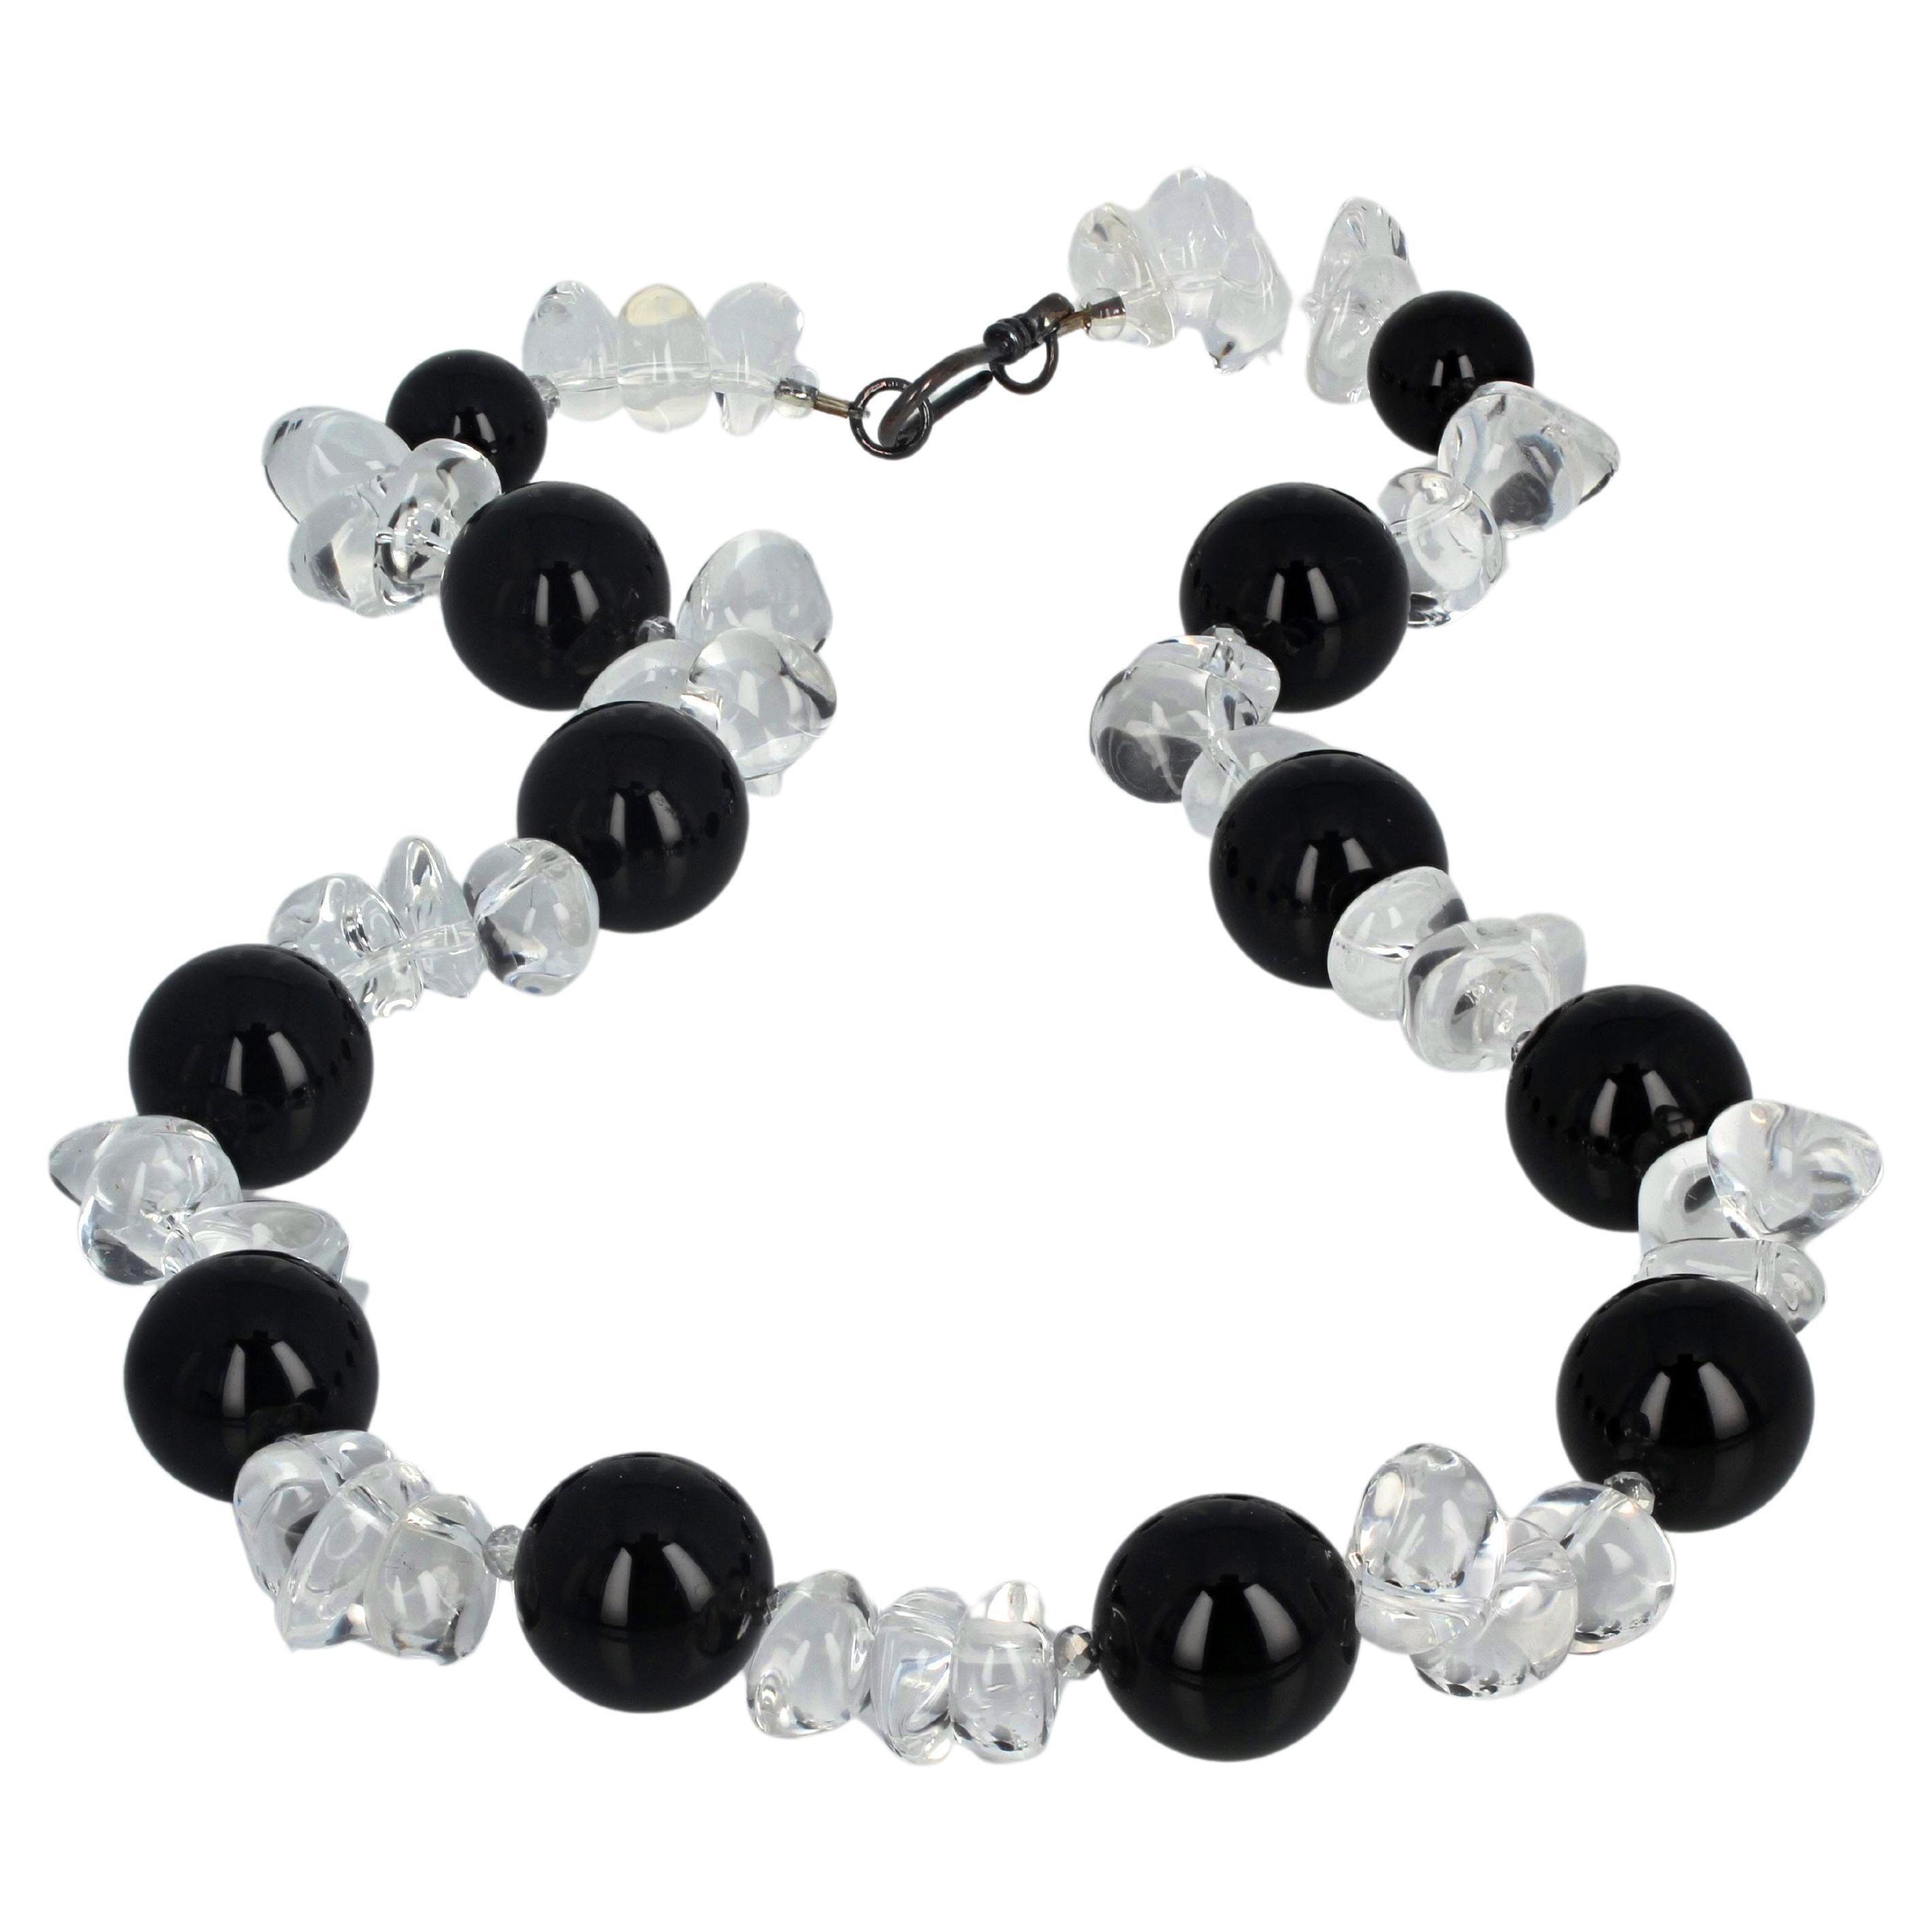 This sparkling stand-out necklace is 19 inches long.  The large black natural Onyx are 18mm.  The silvery translucent sparkling highly polished real white Quartz are chunky shapes to show off the beautiful black Onyx.  The clasp is darkened silver